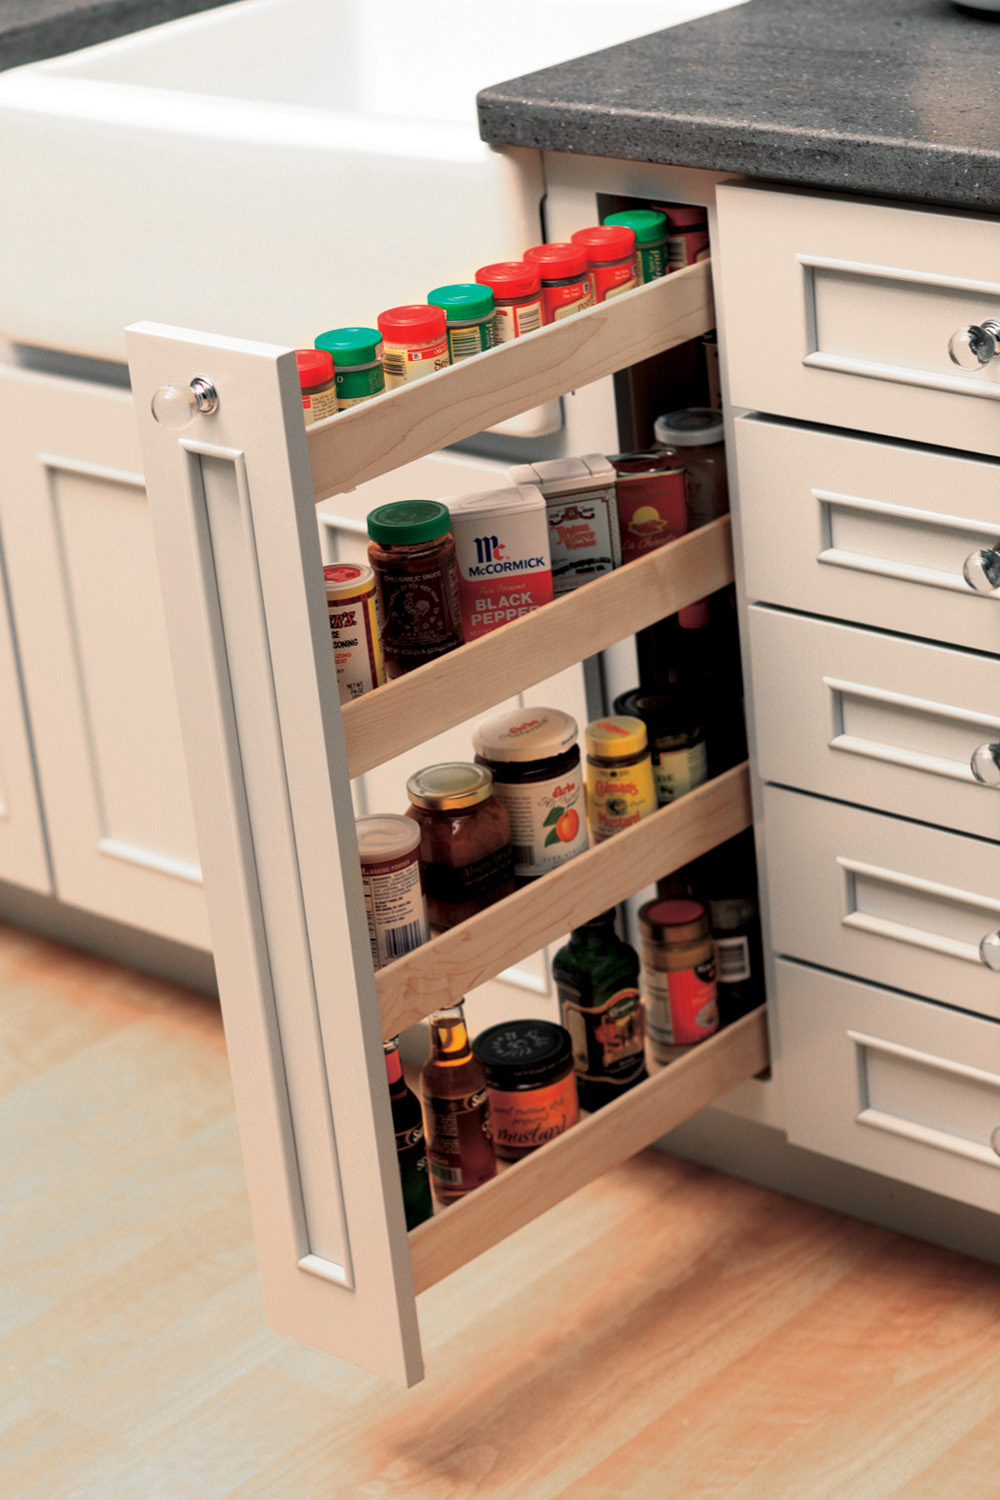 Small spaces offer a surprising amount of spice storage with a vertical Pull-Out Spice Rack. Kitchen Storage idea for spices and small pantry items from Dura Supreme Cabinetry.